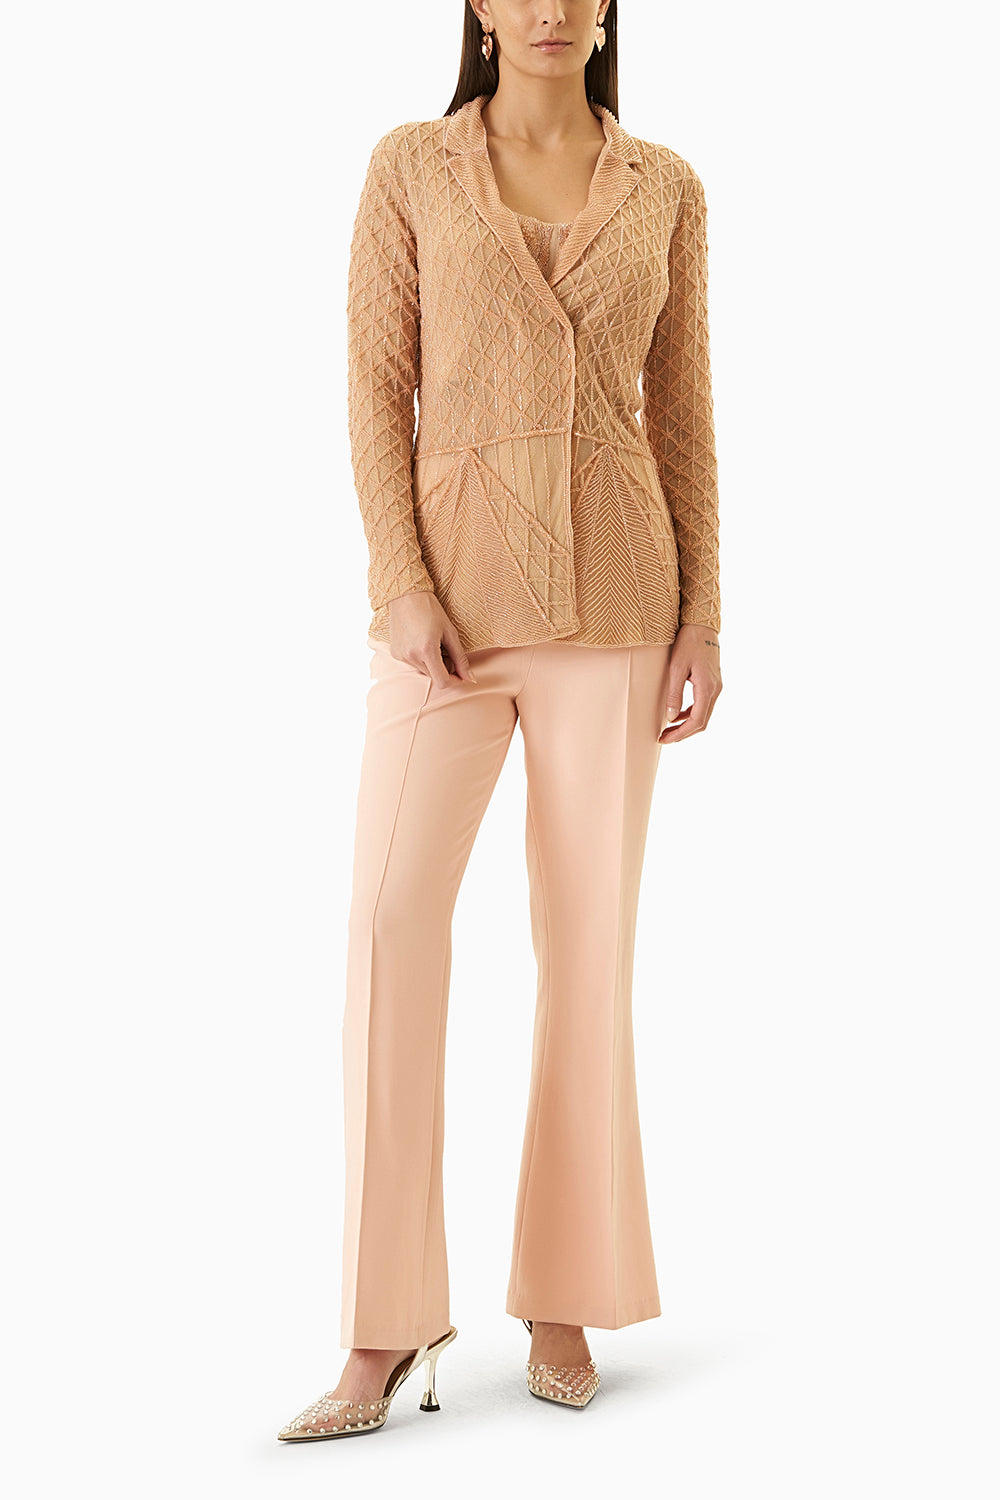 Peach Embellished Jacket With Bustier And Pants